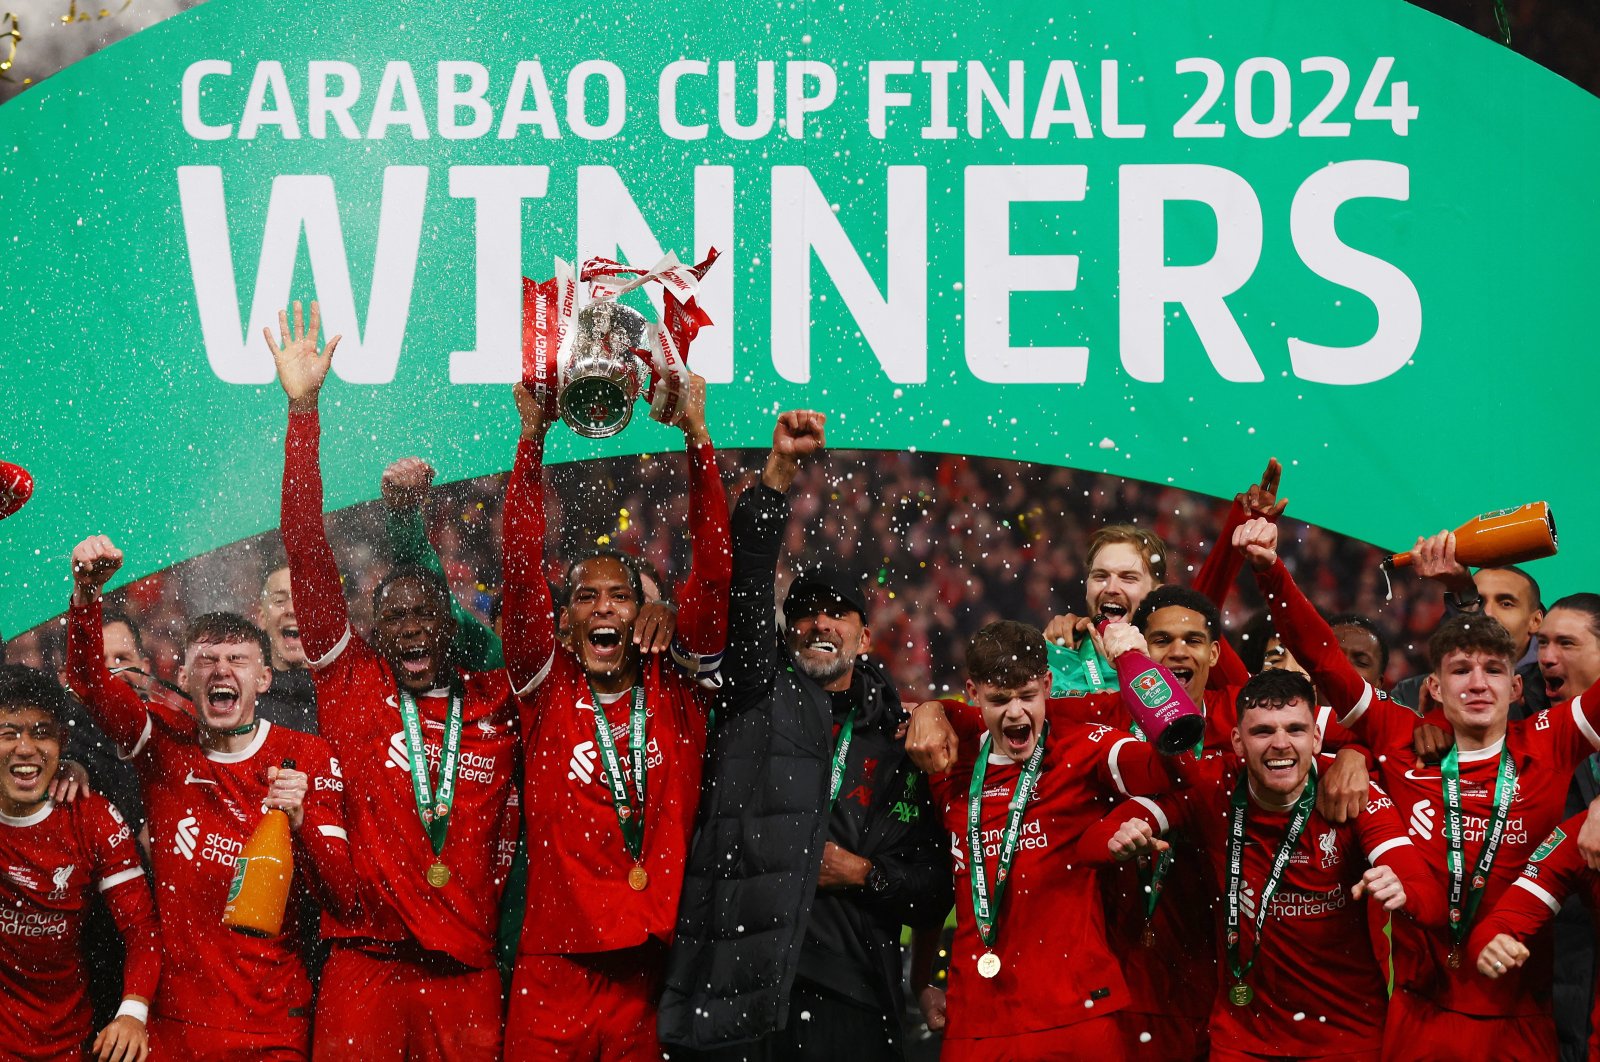 Liverpool coach Jurgen Klopp (C) and his players celebrate winning the Carabao Cup with the trophy at Wembley Stadium, London, U.K., Feb. 25, 2024. (Reuters Photo) 